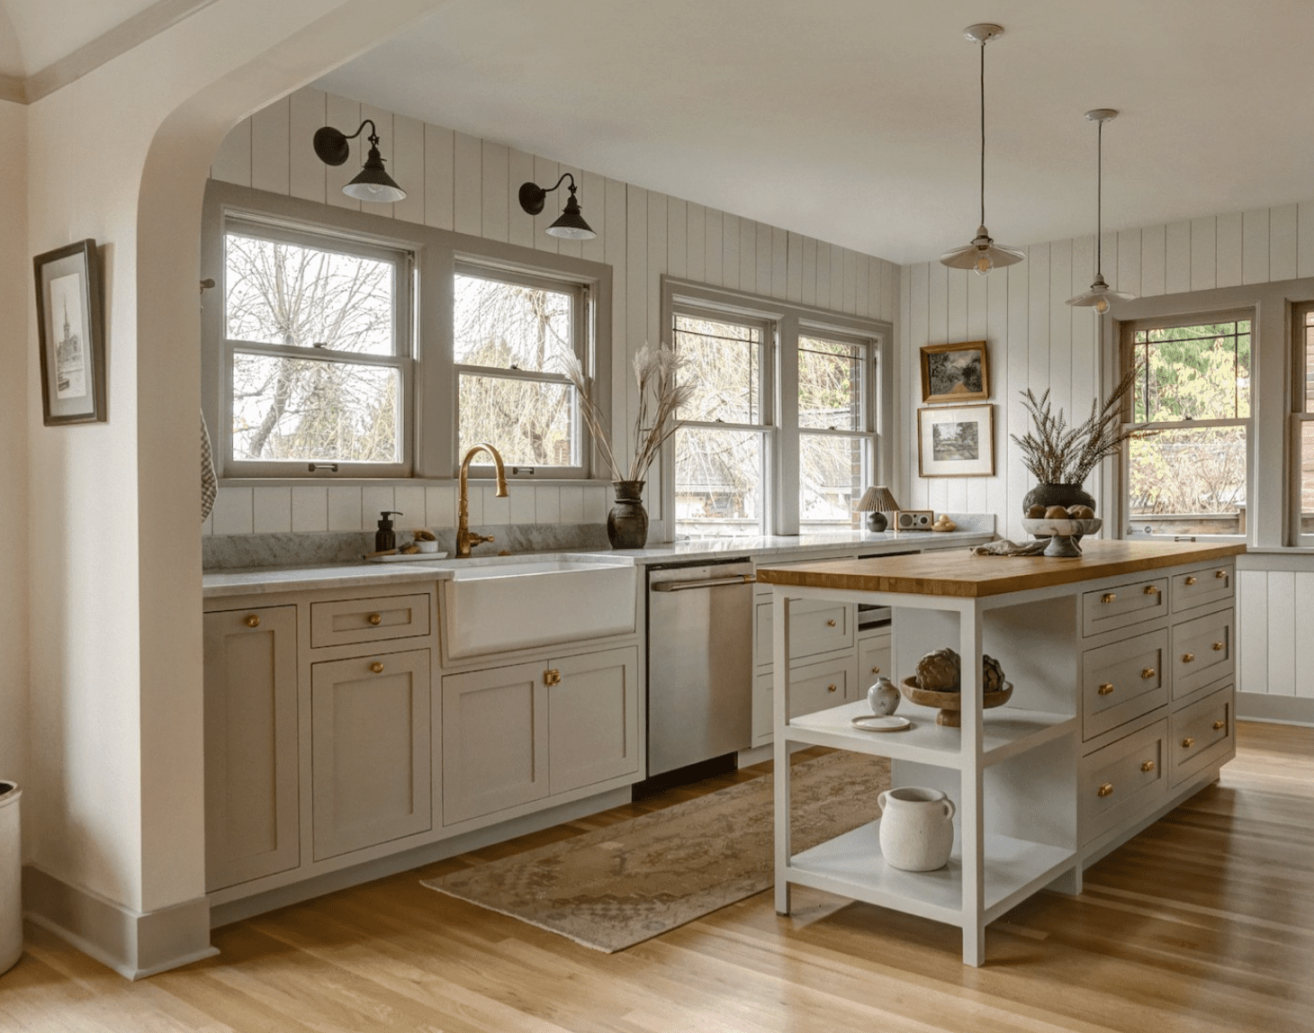 Fresh Ideas For Painting Your Farmhouse Kitchen Cabinets